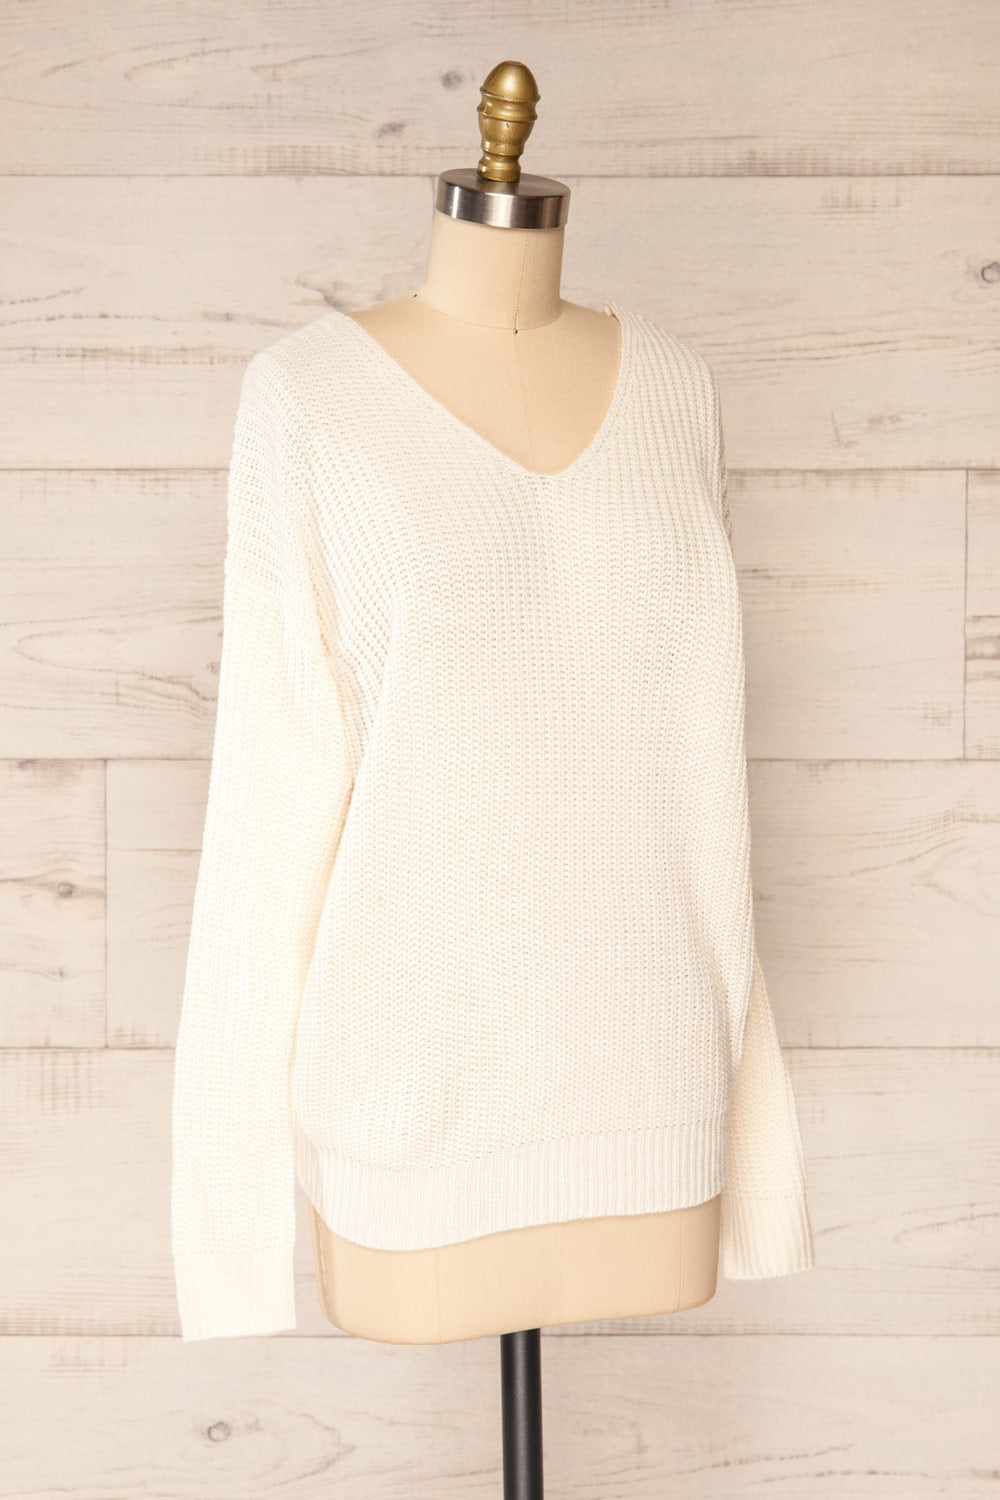 Cute Lifestyle Cream Pointelle Knit V-Neck Sweater Top